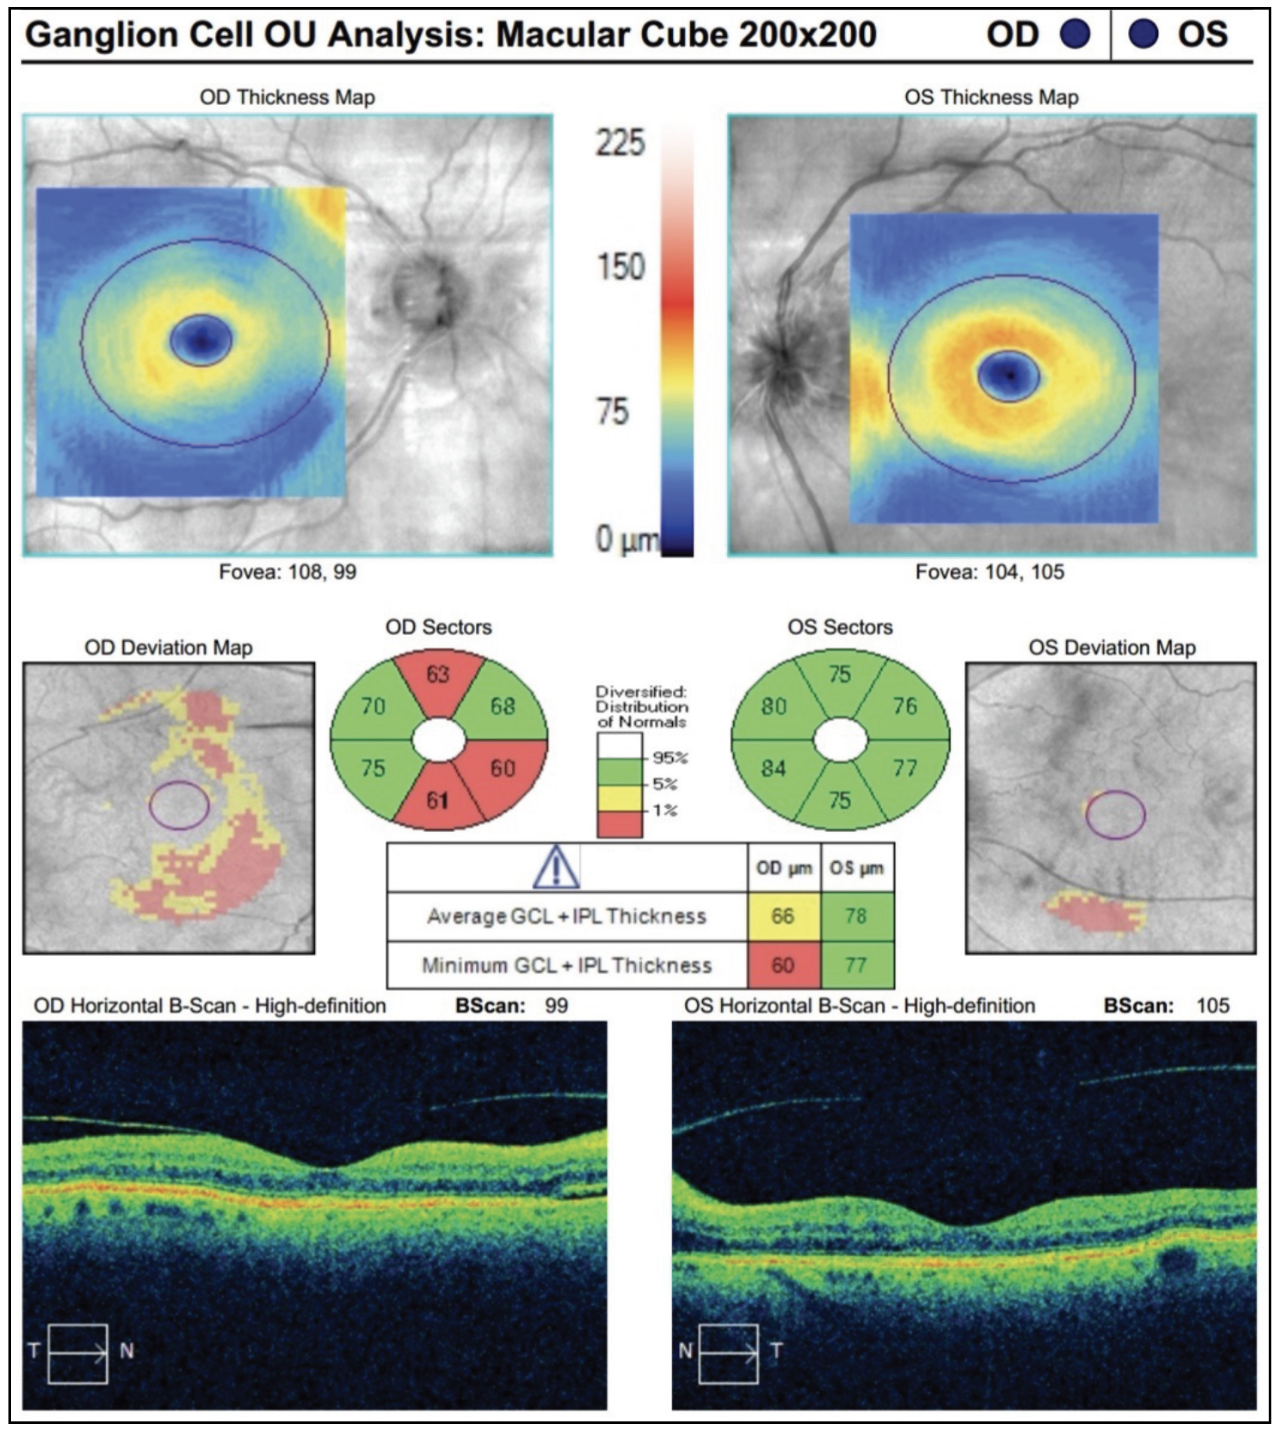 Fig. 2. The patient’s OCT ganglion cell analysis reveals early thinning in the right eye but a normal study in the left.